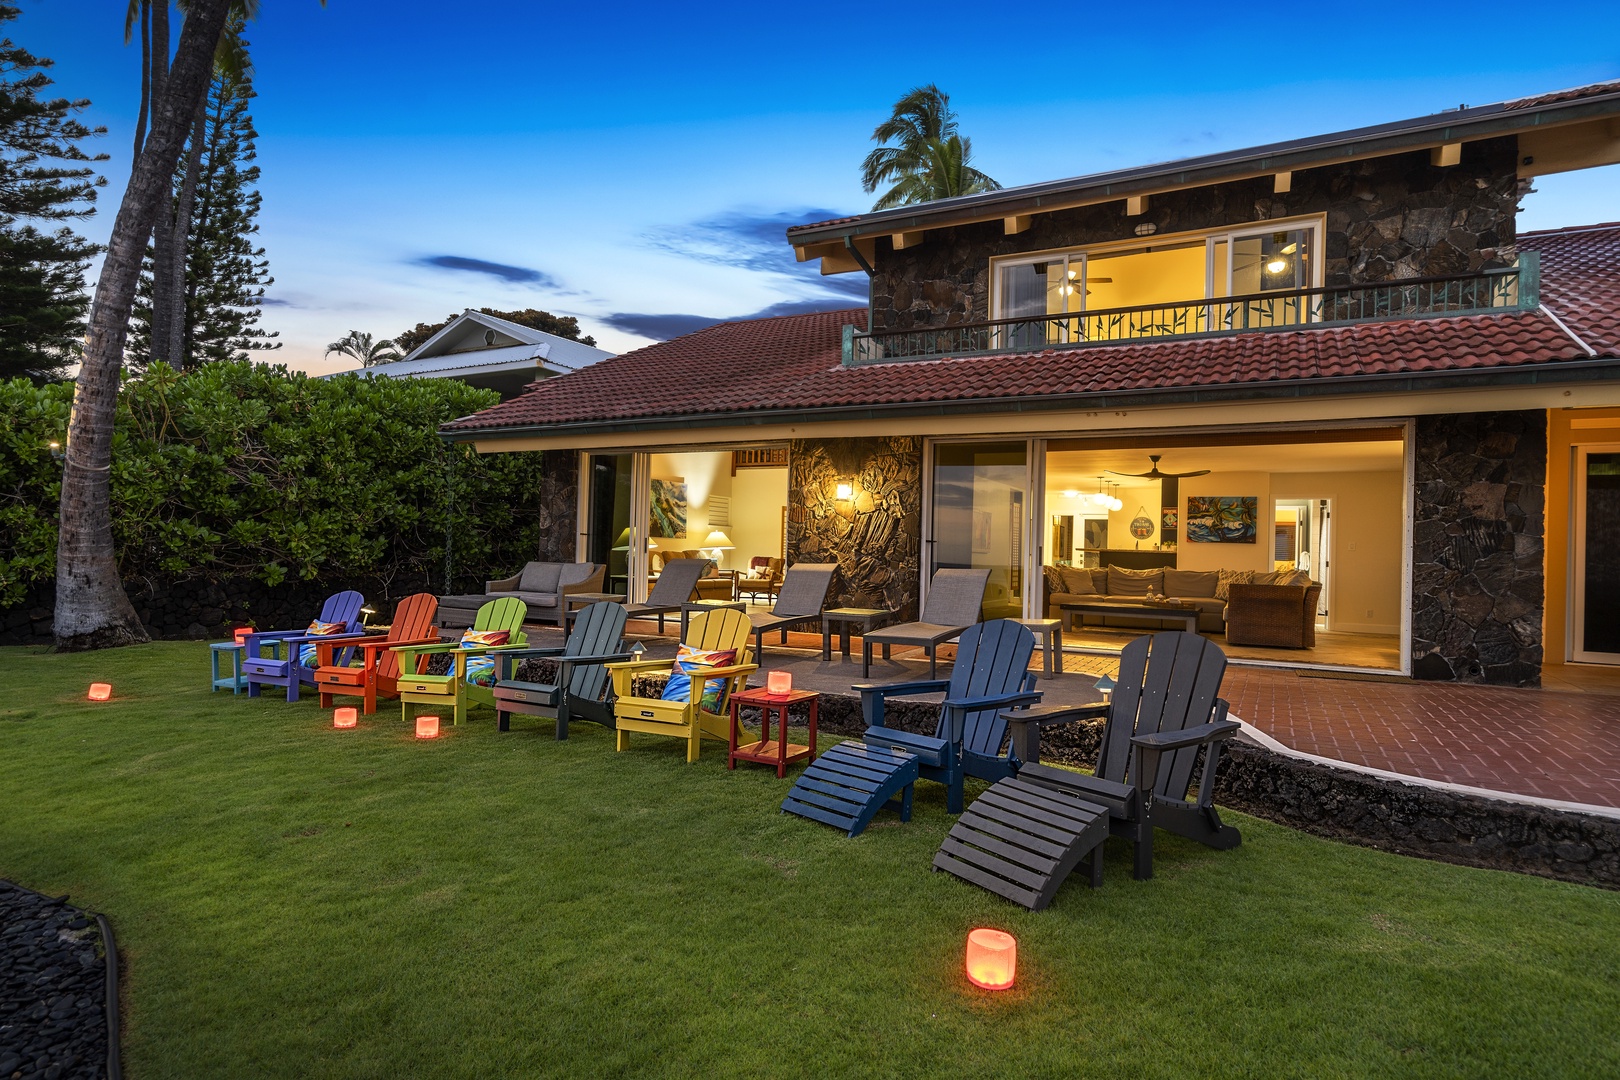 Kailua Kona Vacation Rentals, Hale Pua - Sunset is enjoyable from the plethora of seating options at Hale Pua